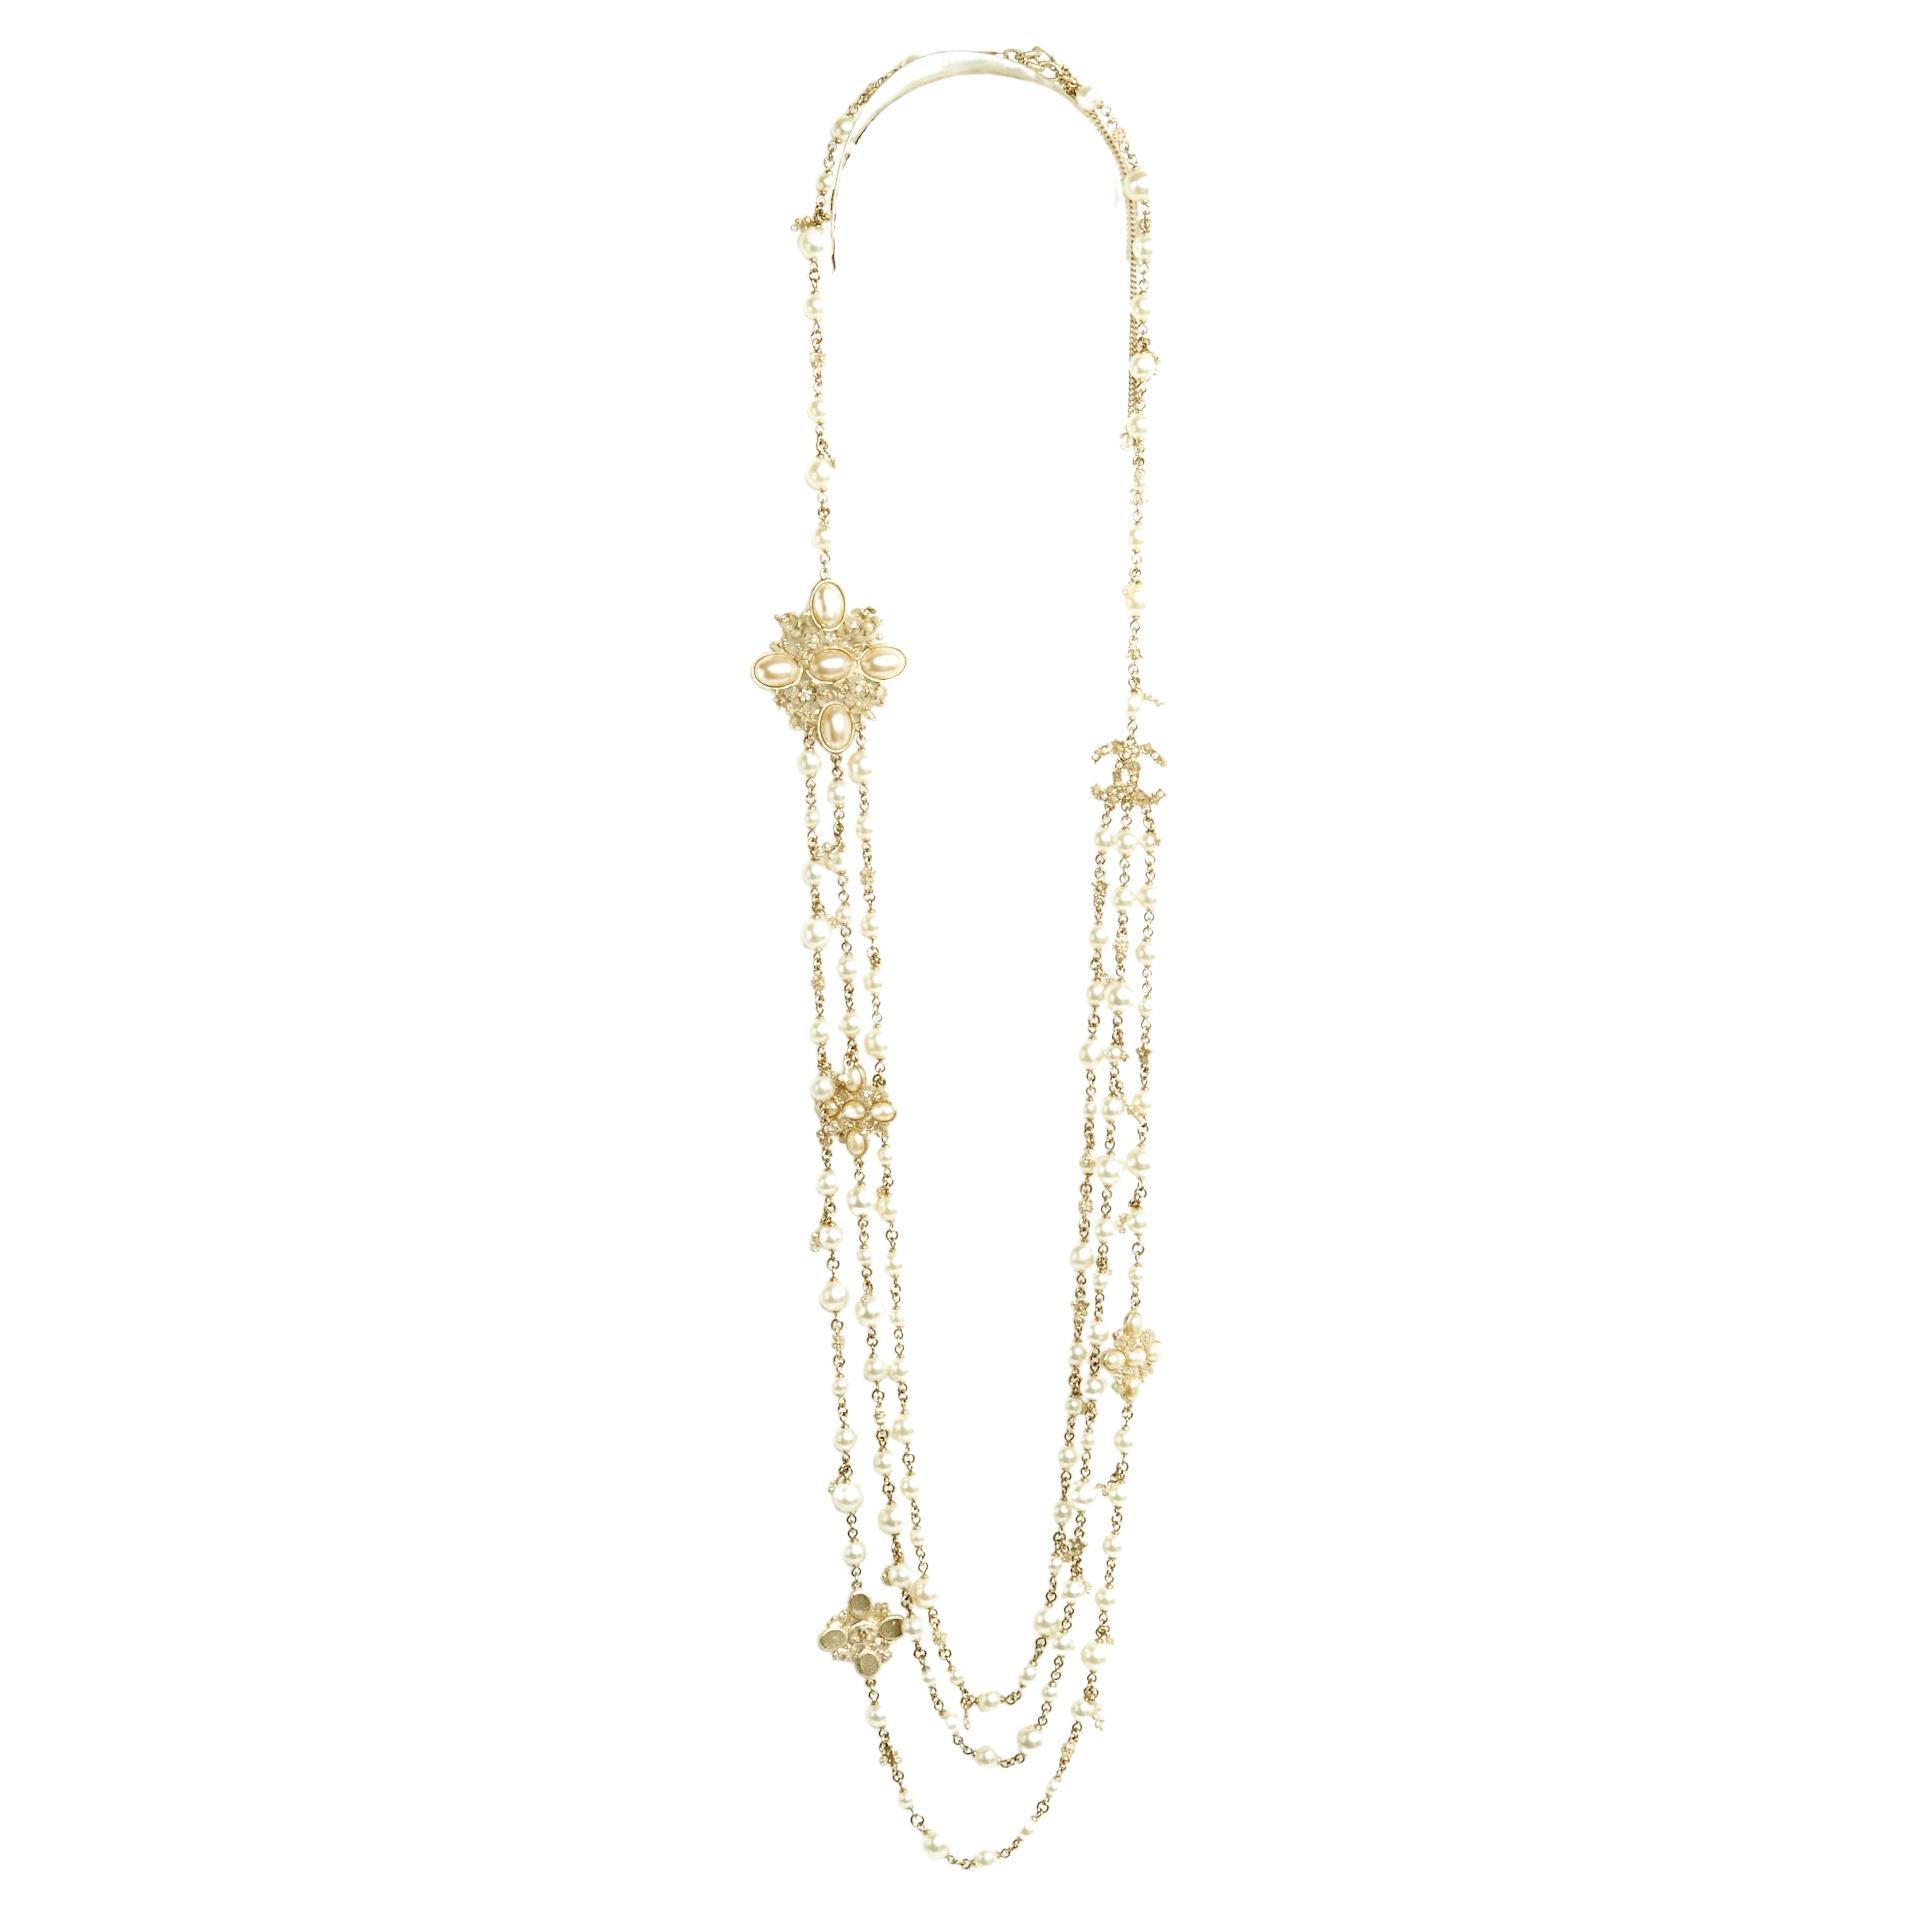 Chanel Pre Fall 2015 Paris Salzburg Pearls string necklace For Sale